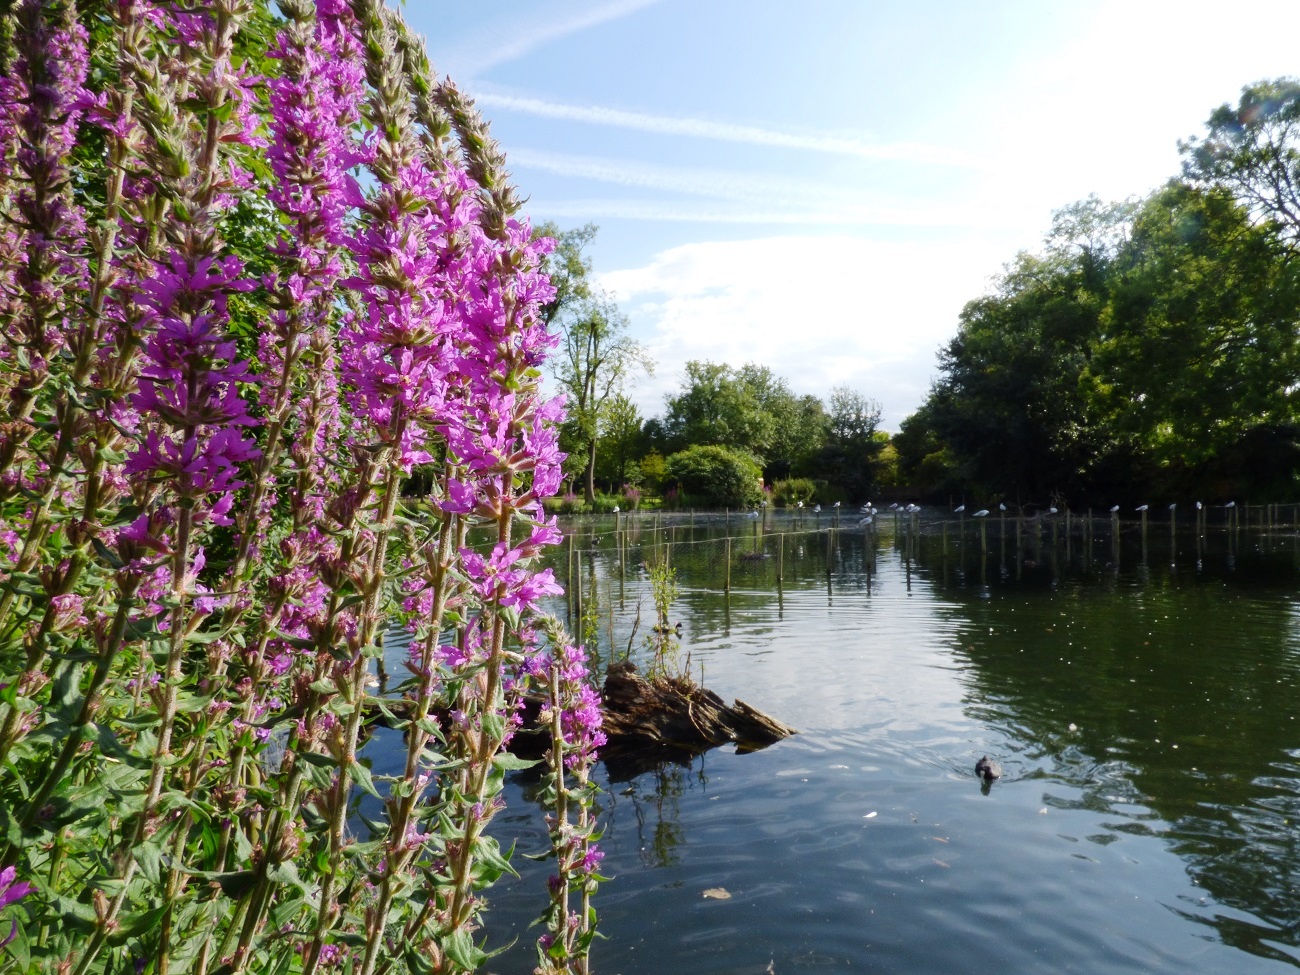 20160810_Borough-of-Sutton_Waddon-Ponds_The-Life-of-Waddon-Ponds